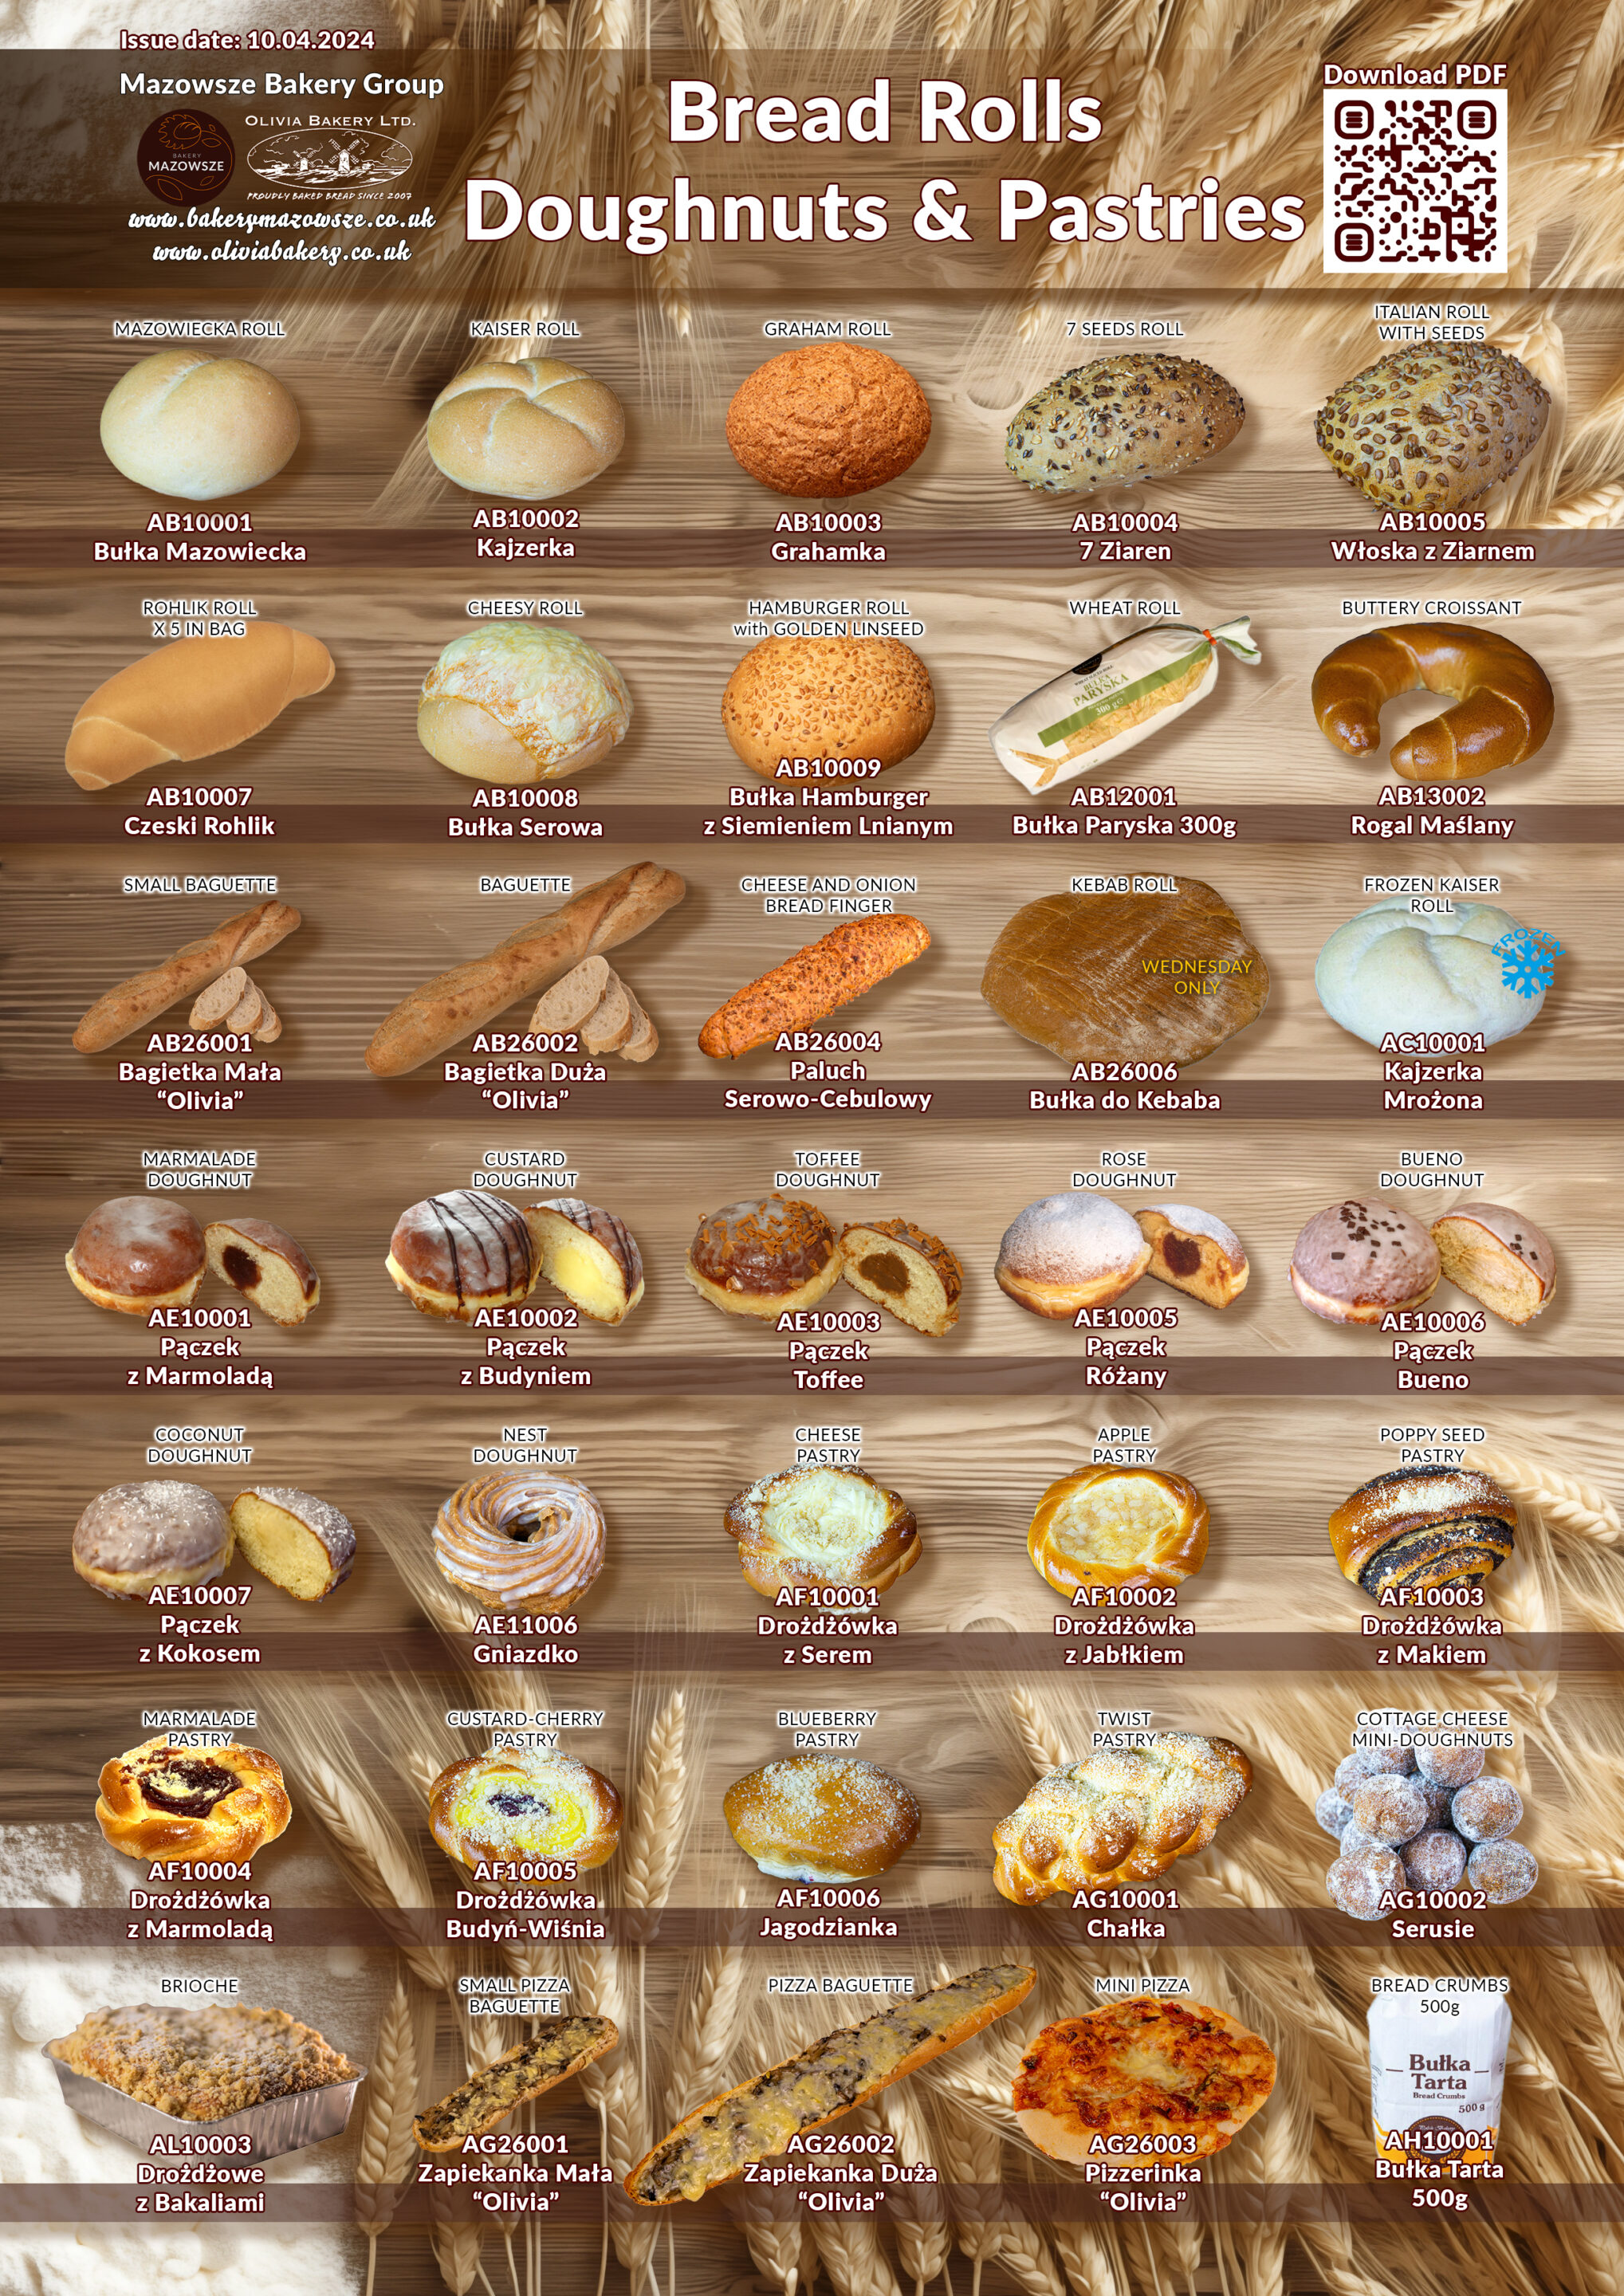 Assortment of bread rolls, doughnuts, and pastries from Mazowsze Bakery Group, including traditional and unique varieties.